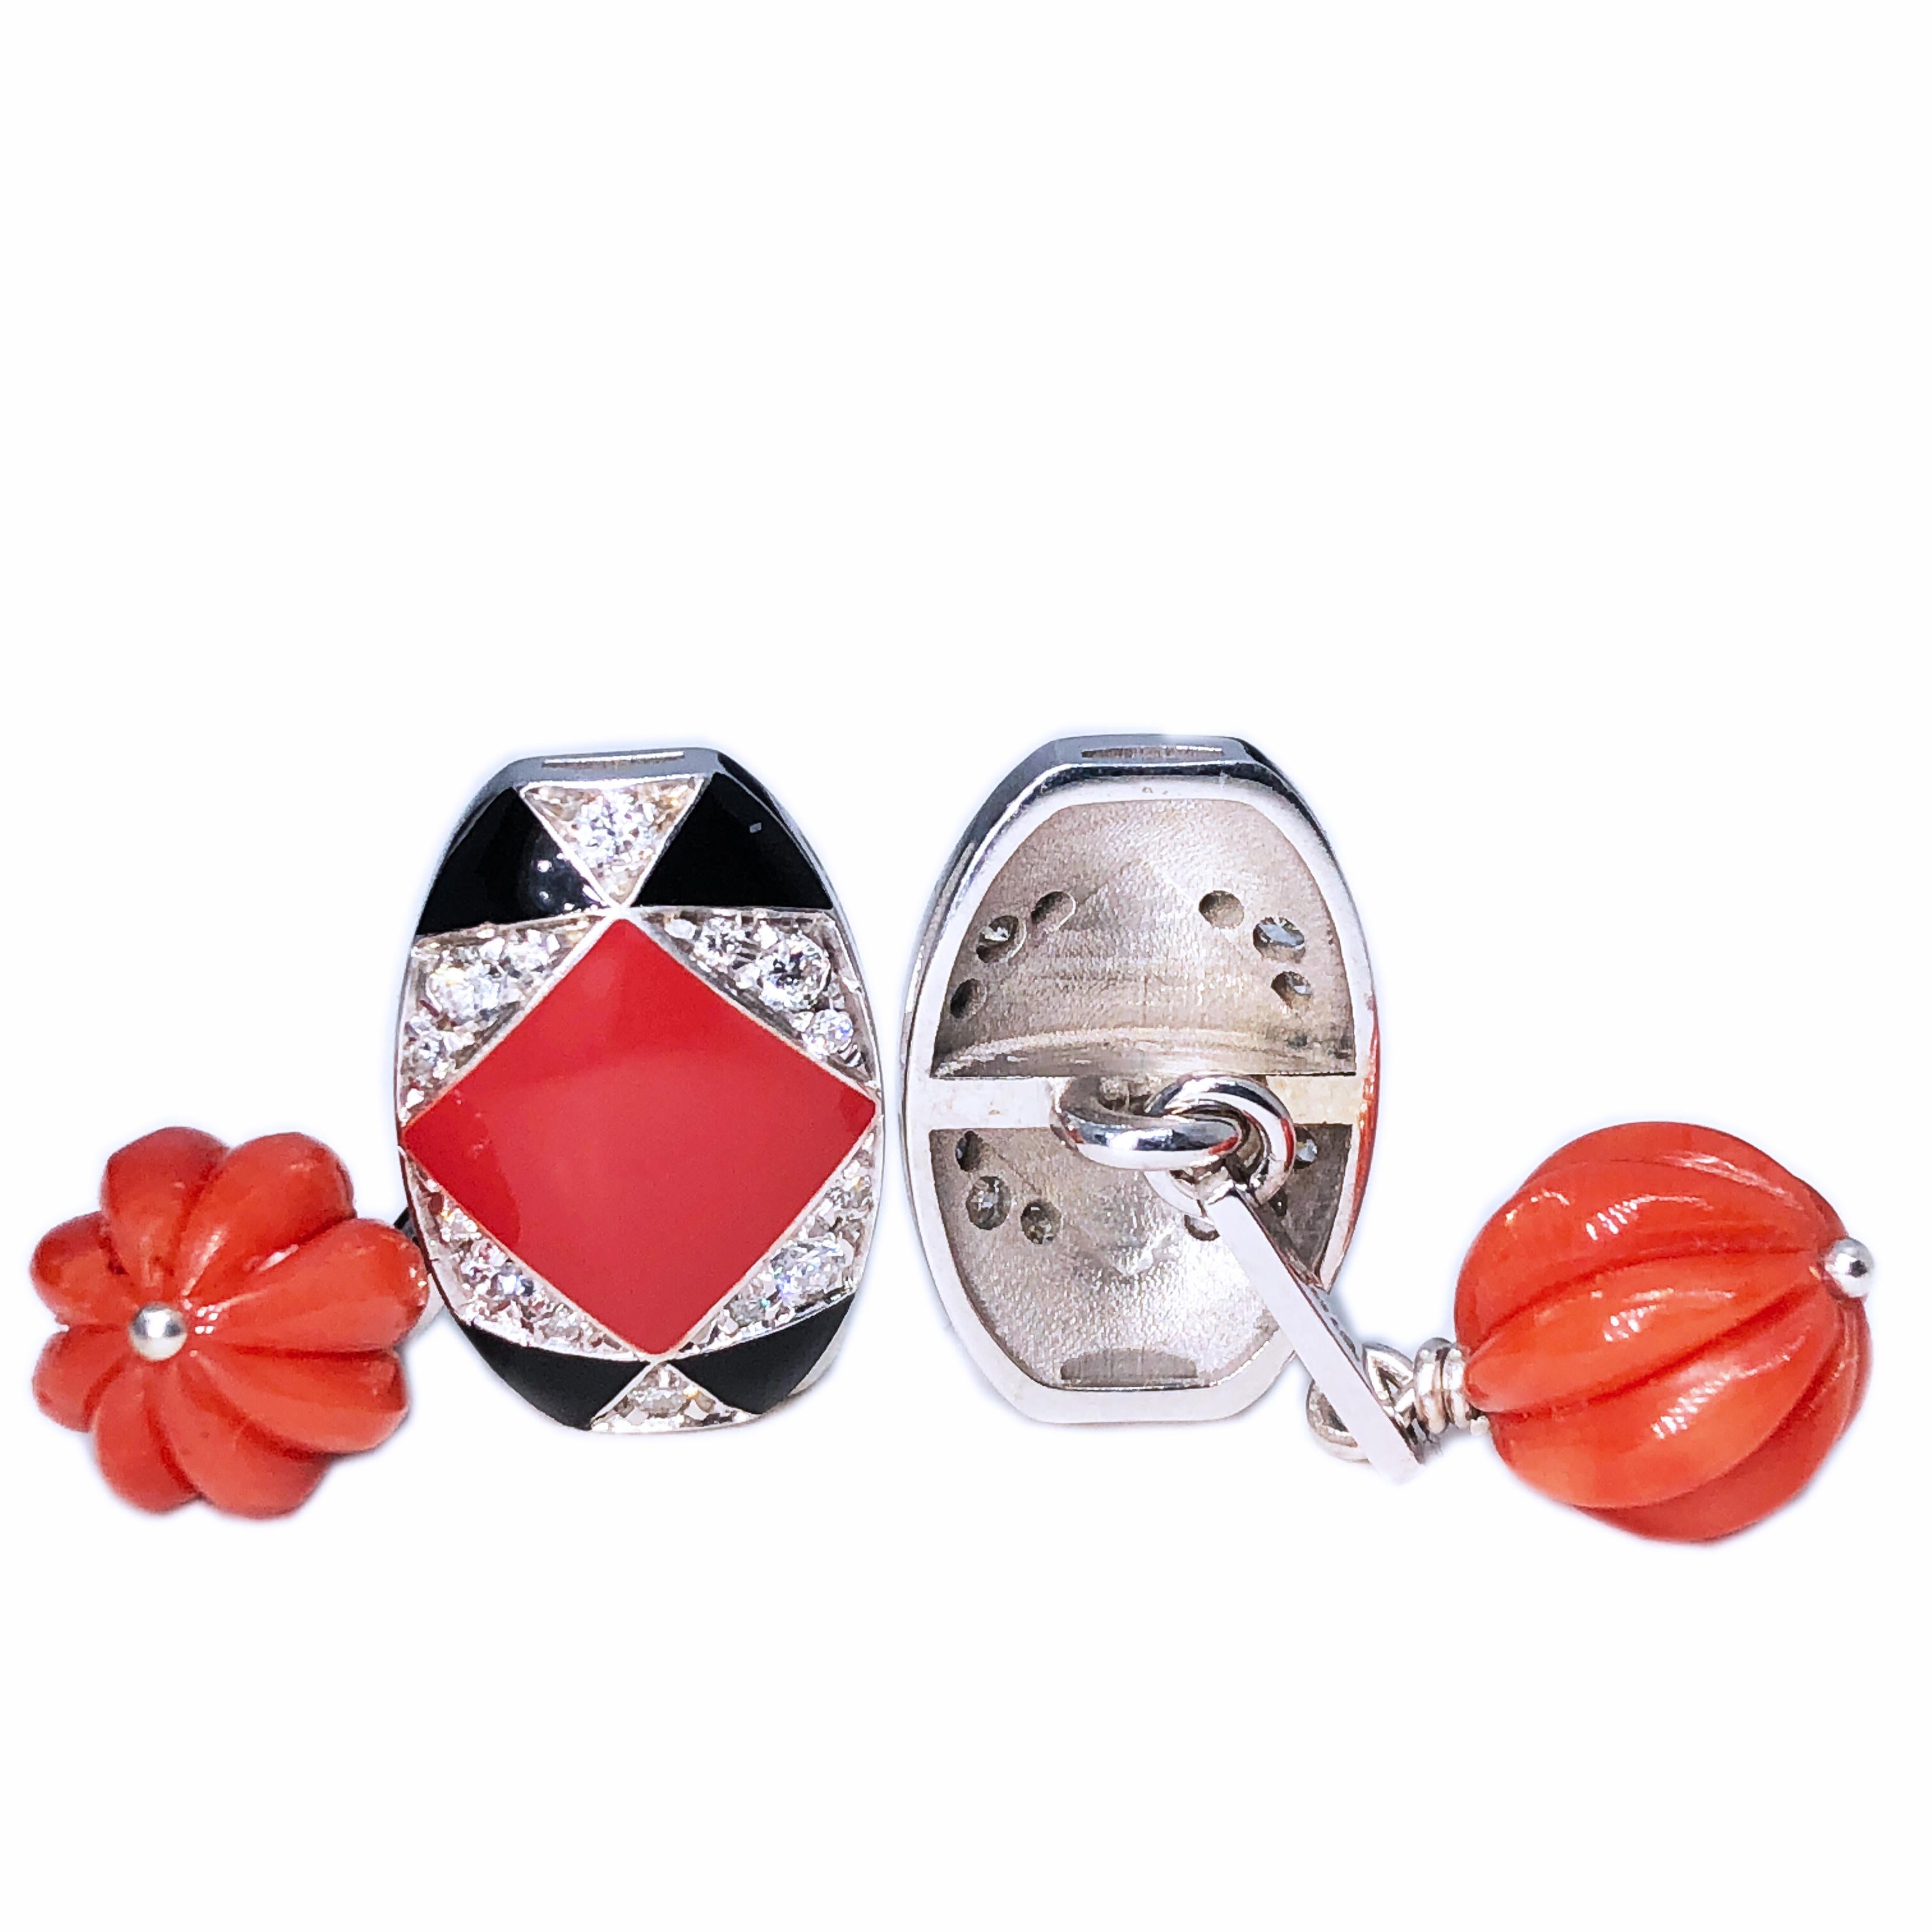 One-of-a-kind, Unique, Chic Cufflinks featuring 0.32Kt Top Quality White Diamond in an Onyx and Coral-Red Hand Enameled White Gold Setting. A small, hand carved ball back complete this awesome piece.
In our smart Tobacco Suede Leather Case and Pouch.